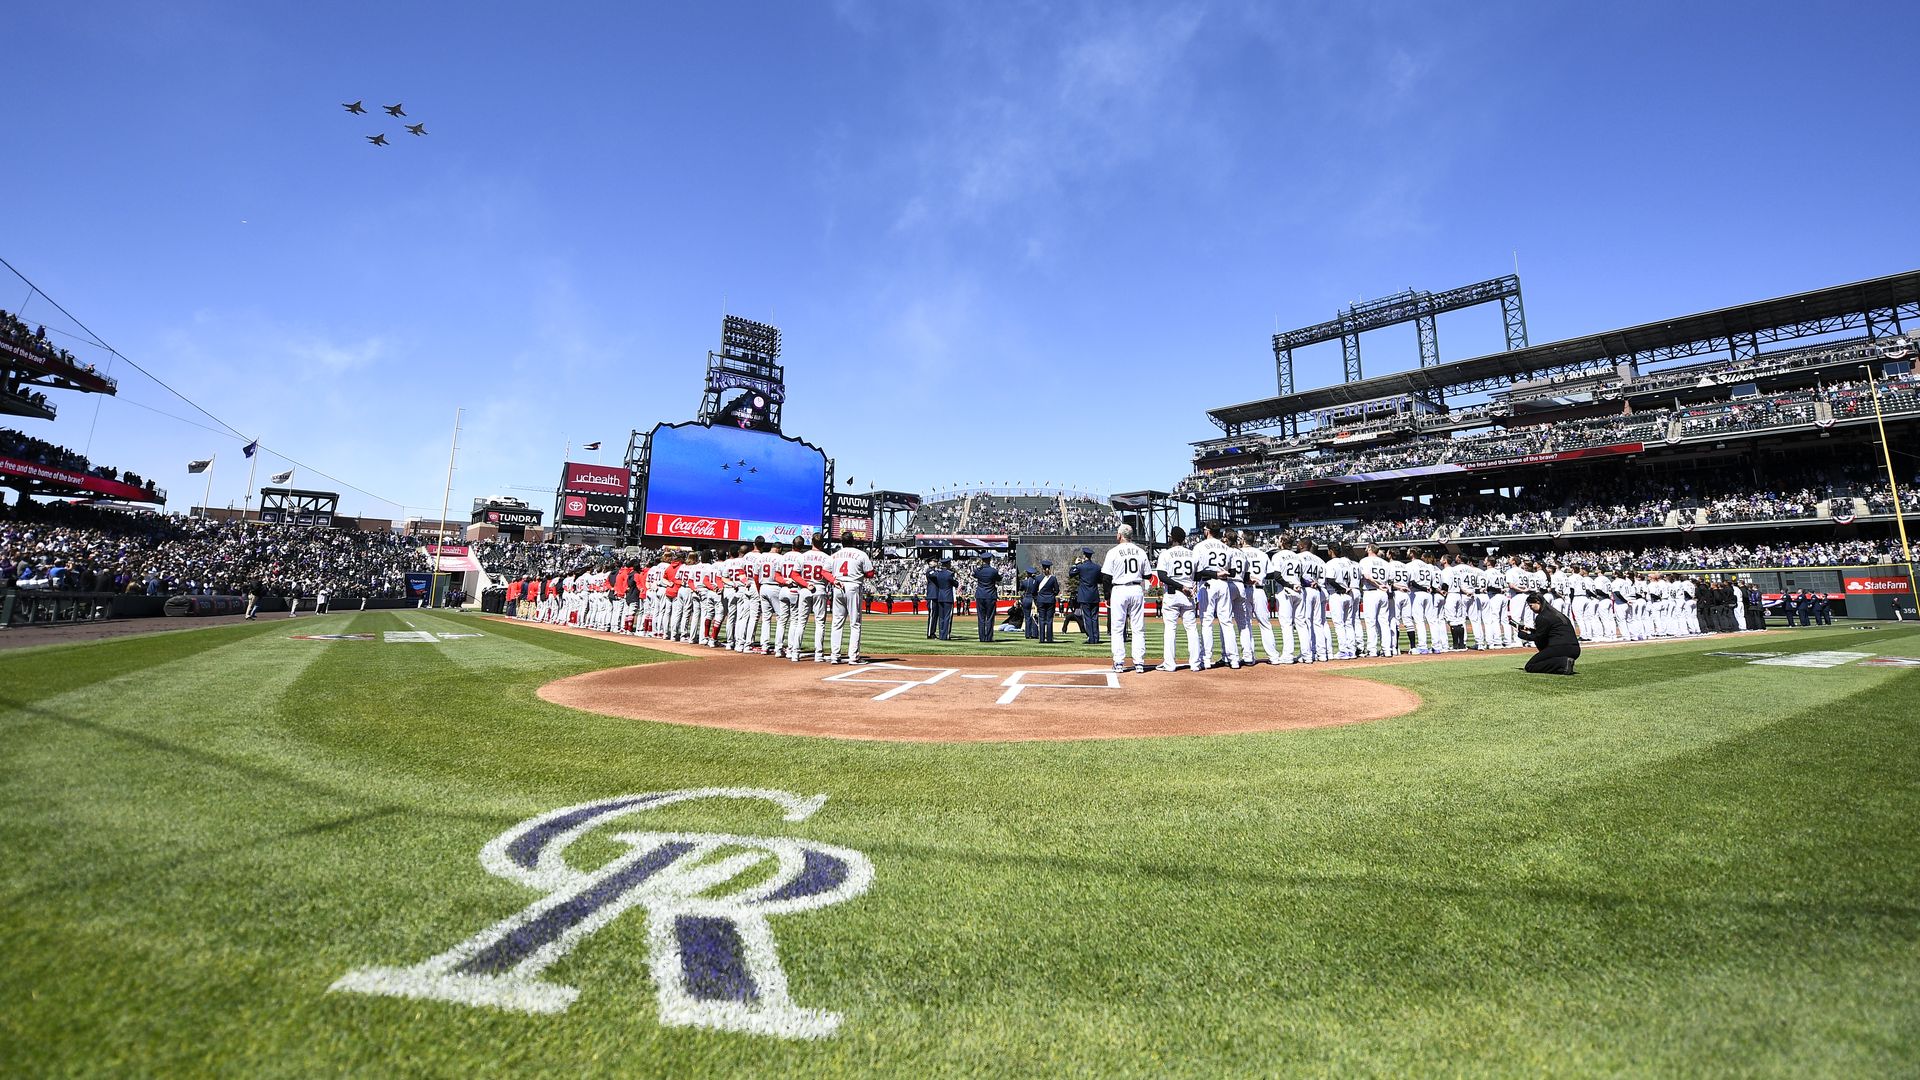 Rockies fans may be able to attend games at Coors Field in 2020